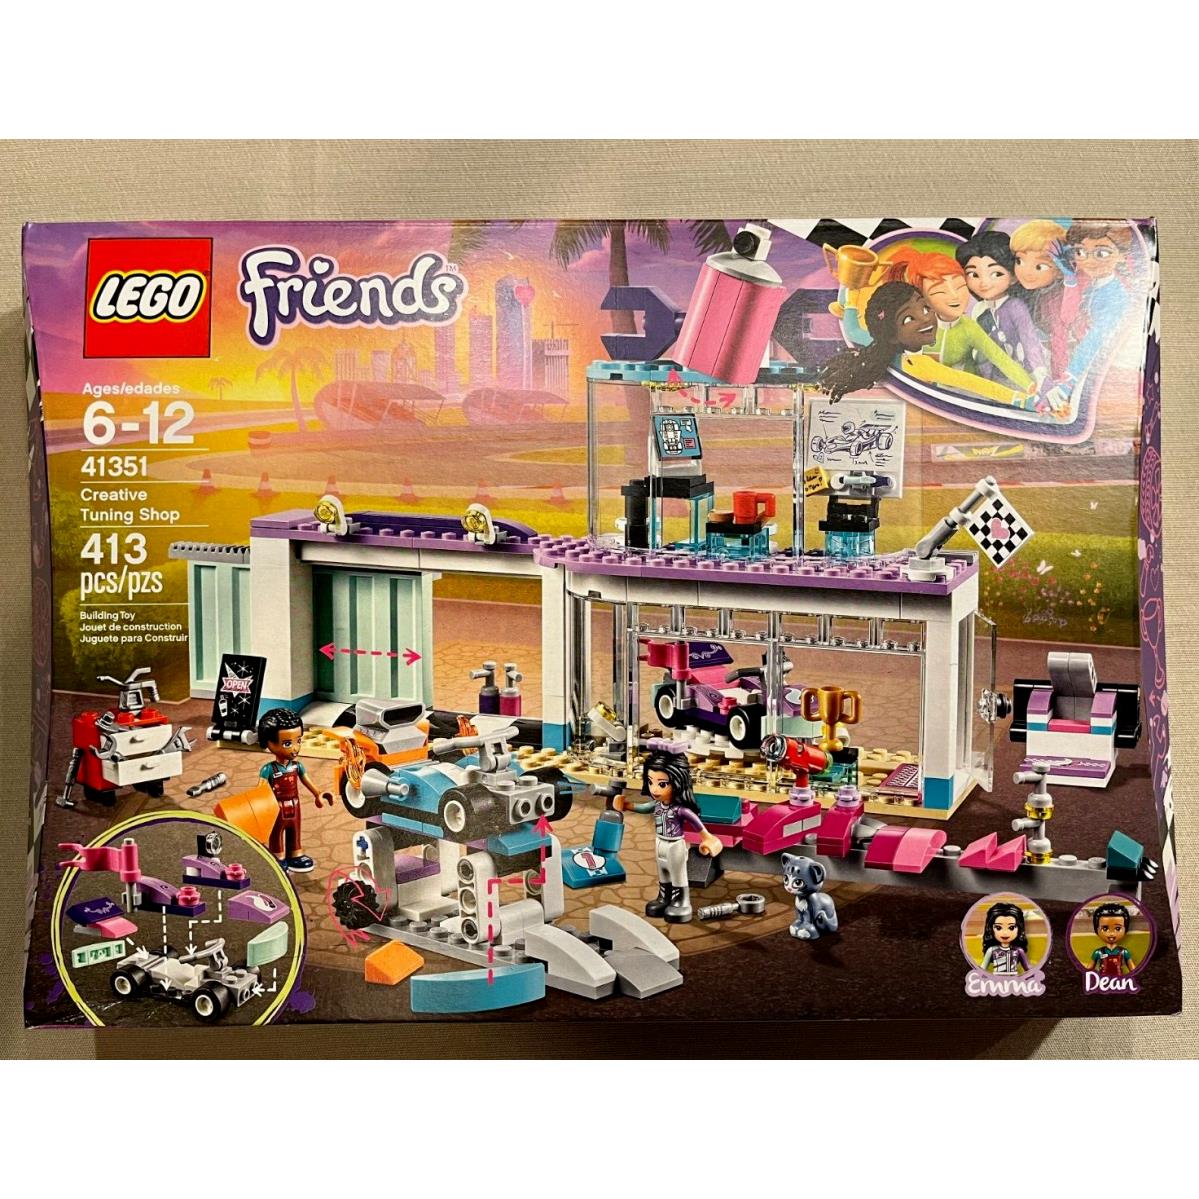 Lego 41351 Friends Creative Tuning Shop 413 Pieces Building Kit Retired Set Gift